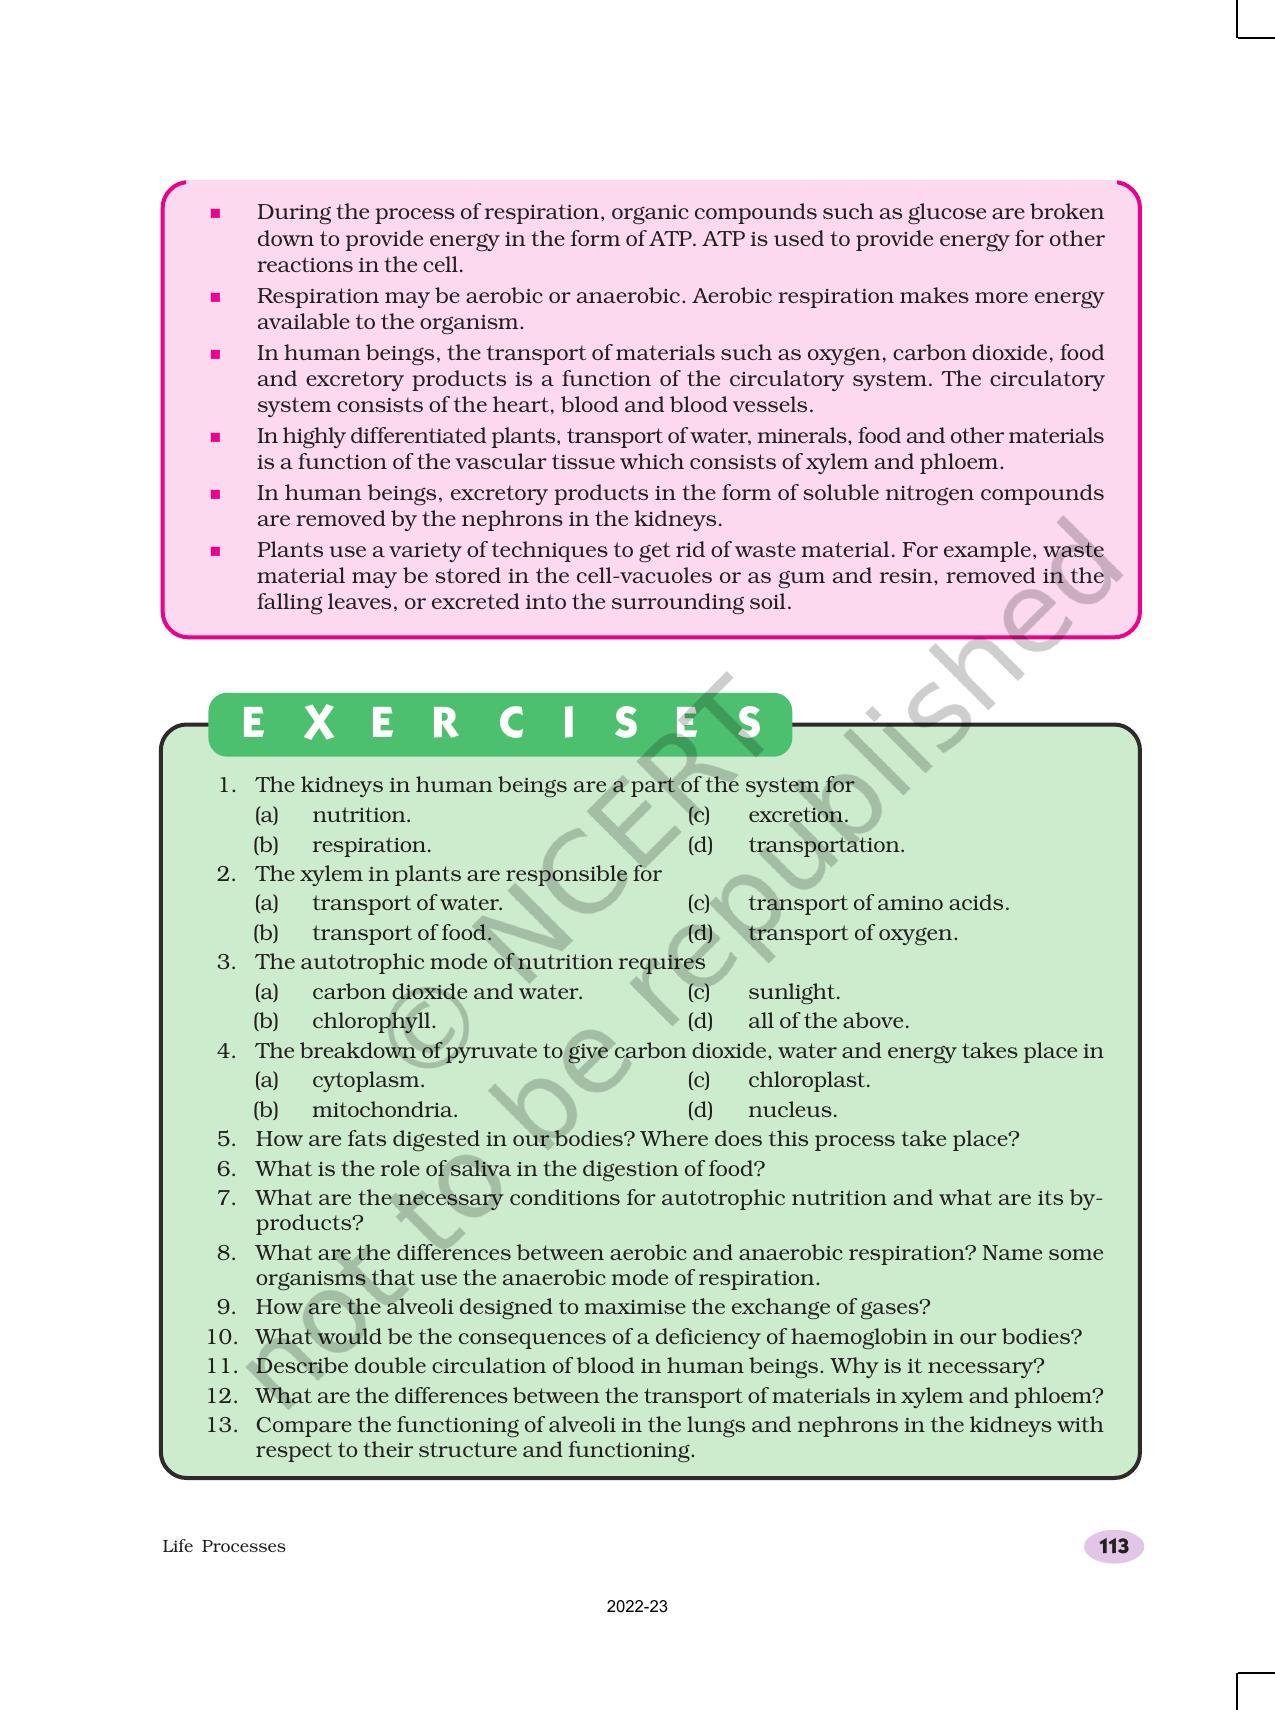 NCERT Book for Class 10 Science Chapter 6 Life Processes - Page 21